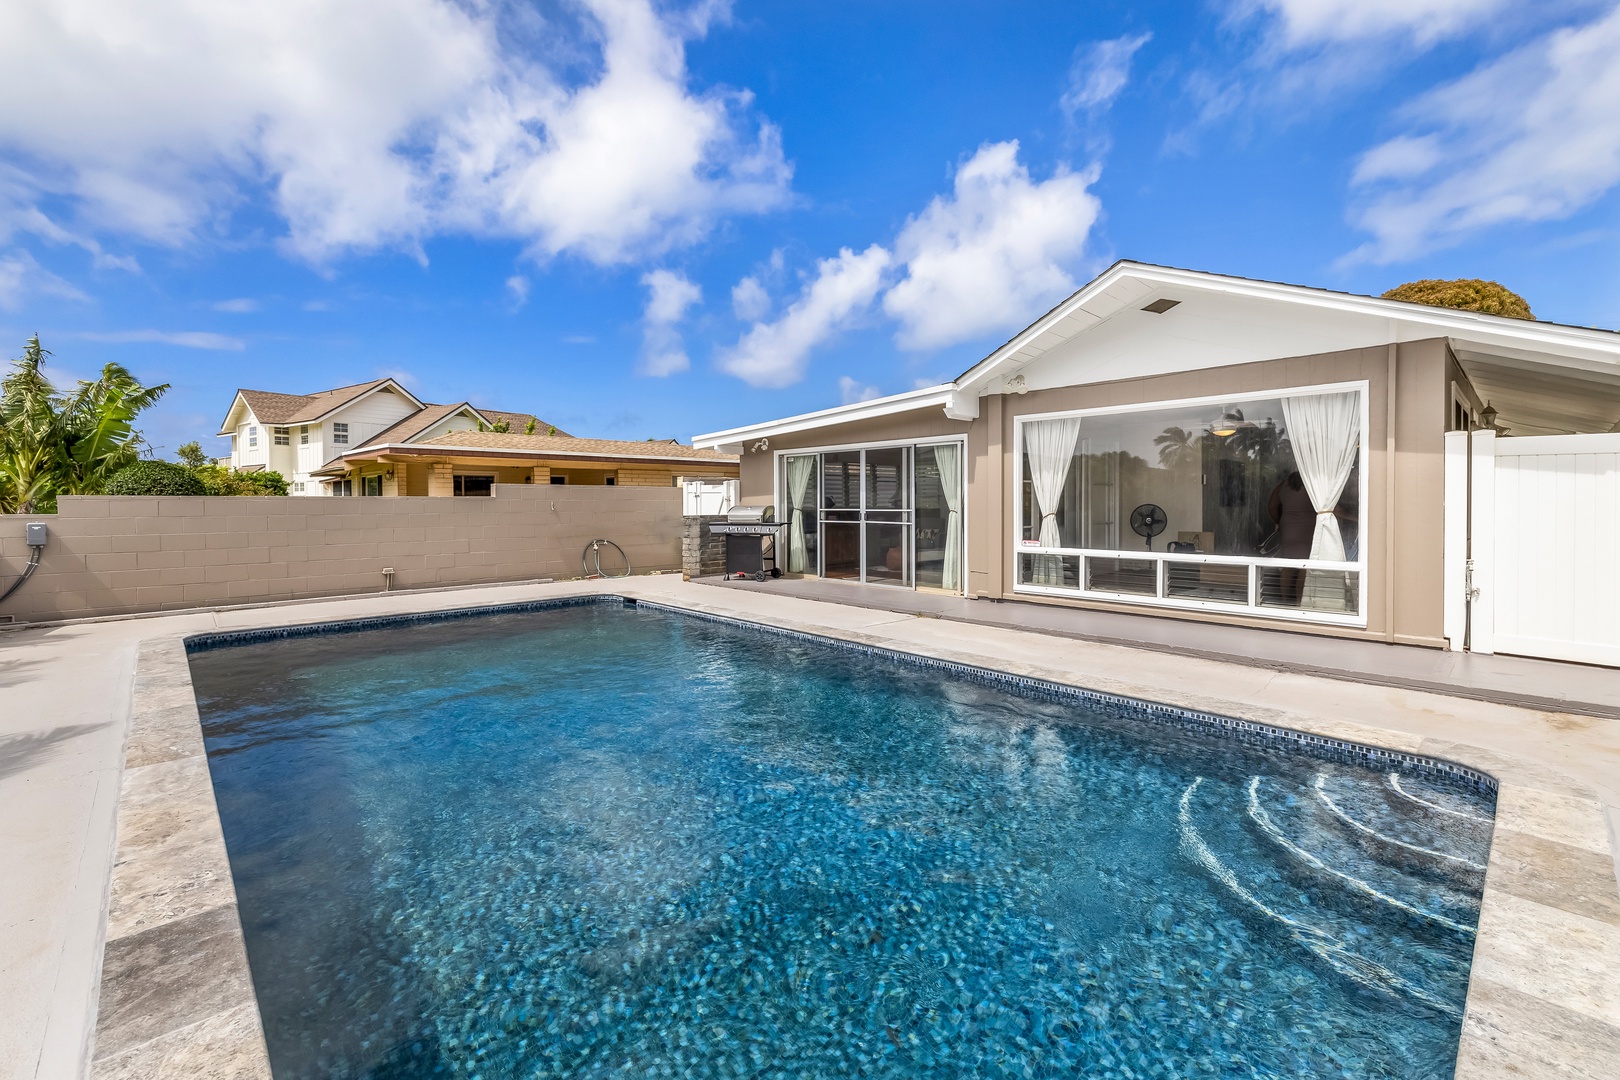 Honolulu Vacation Rentals, Kahala Cottage - Enjoy the private pool with crystal clear water.